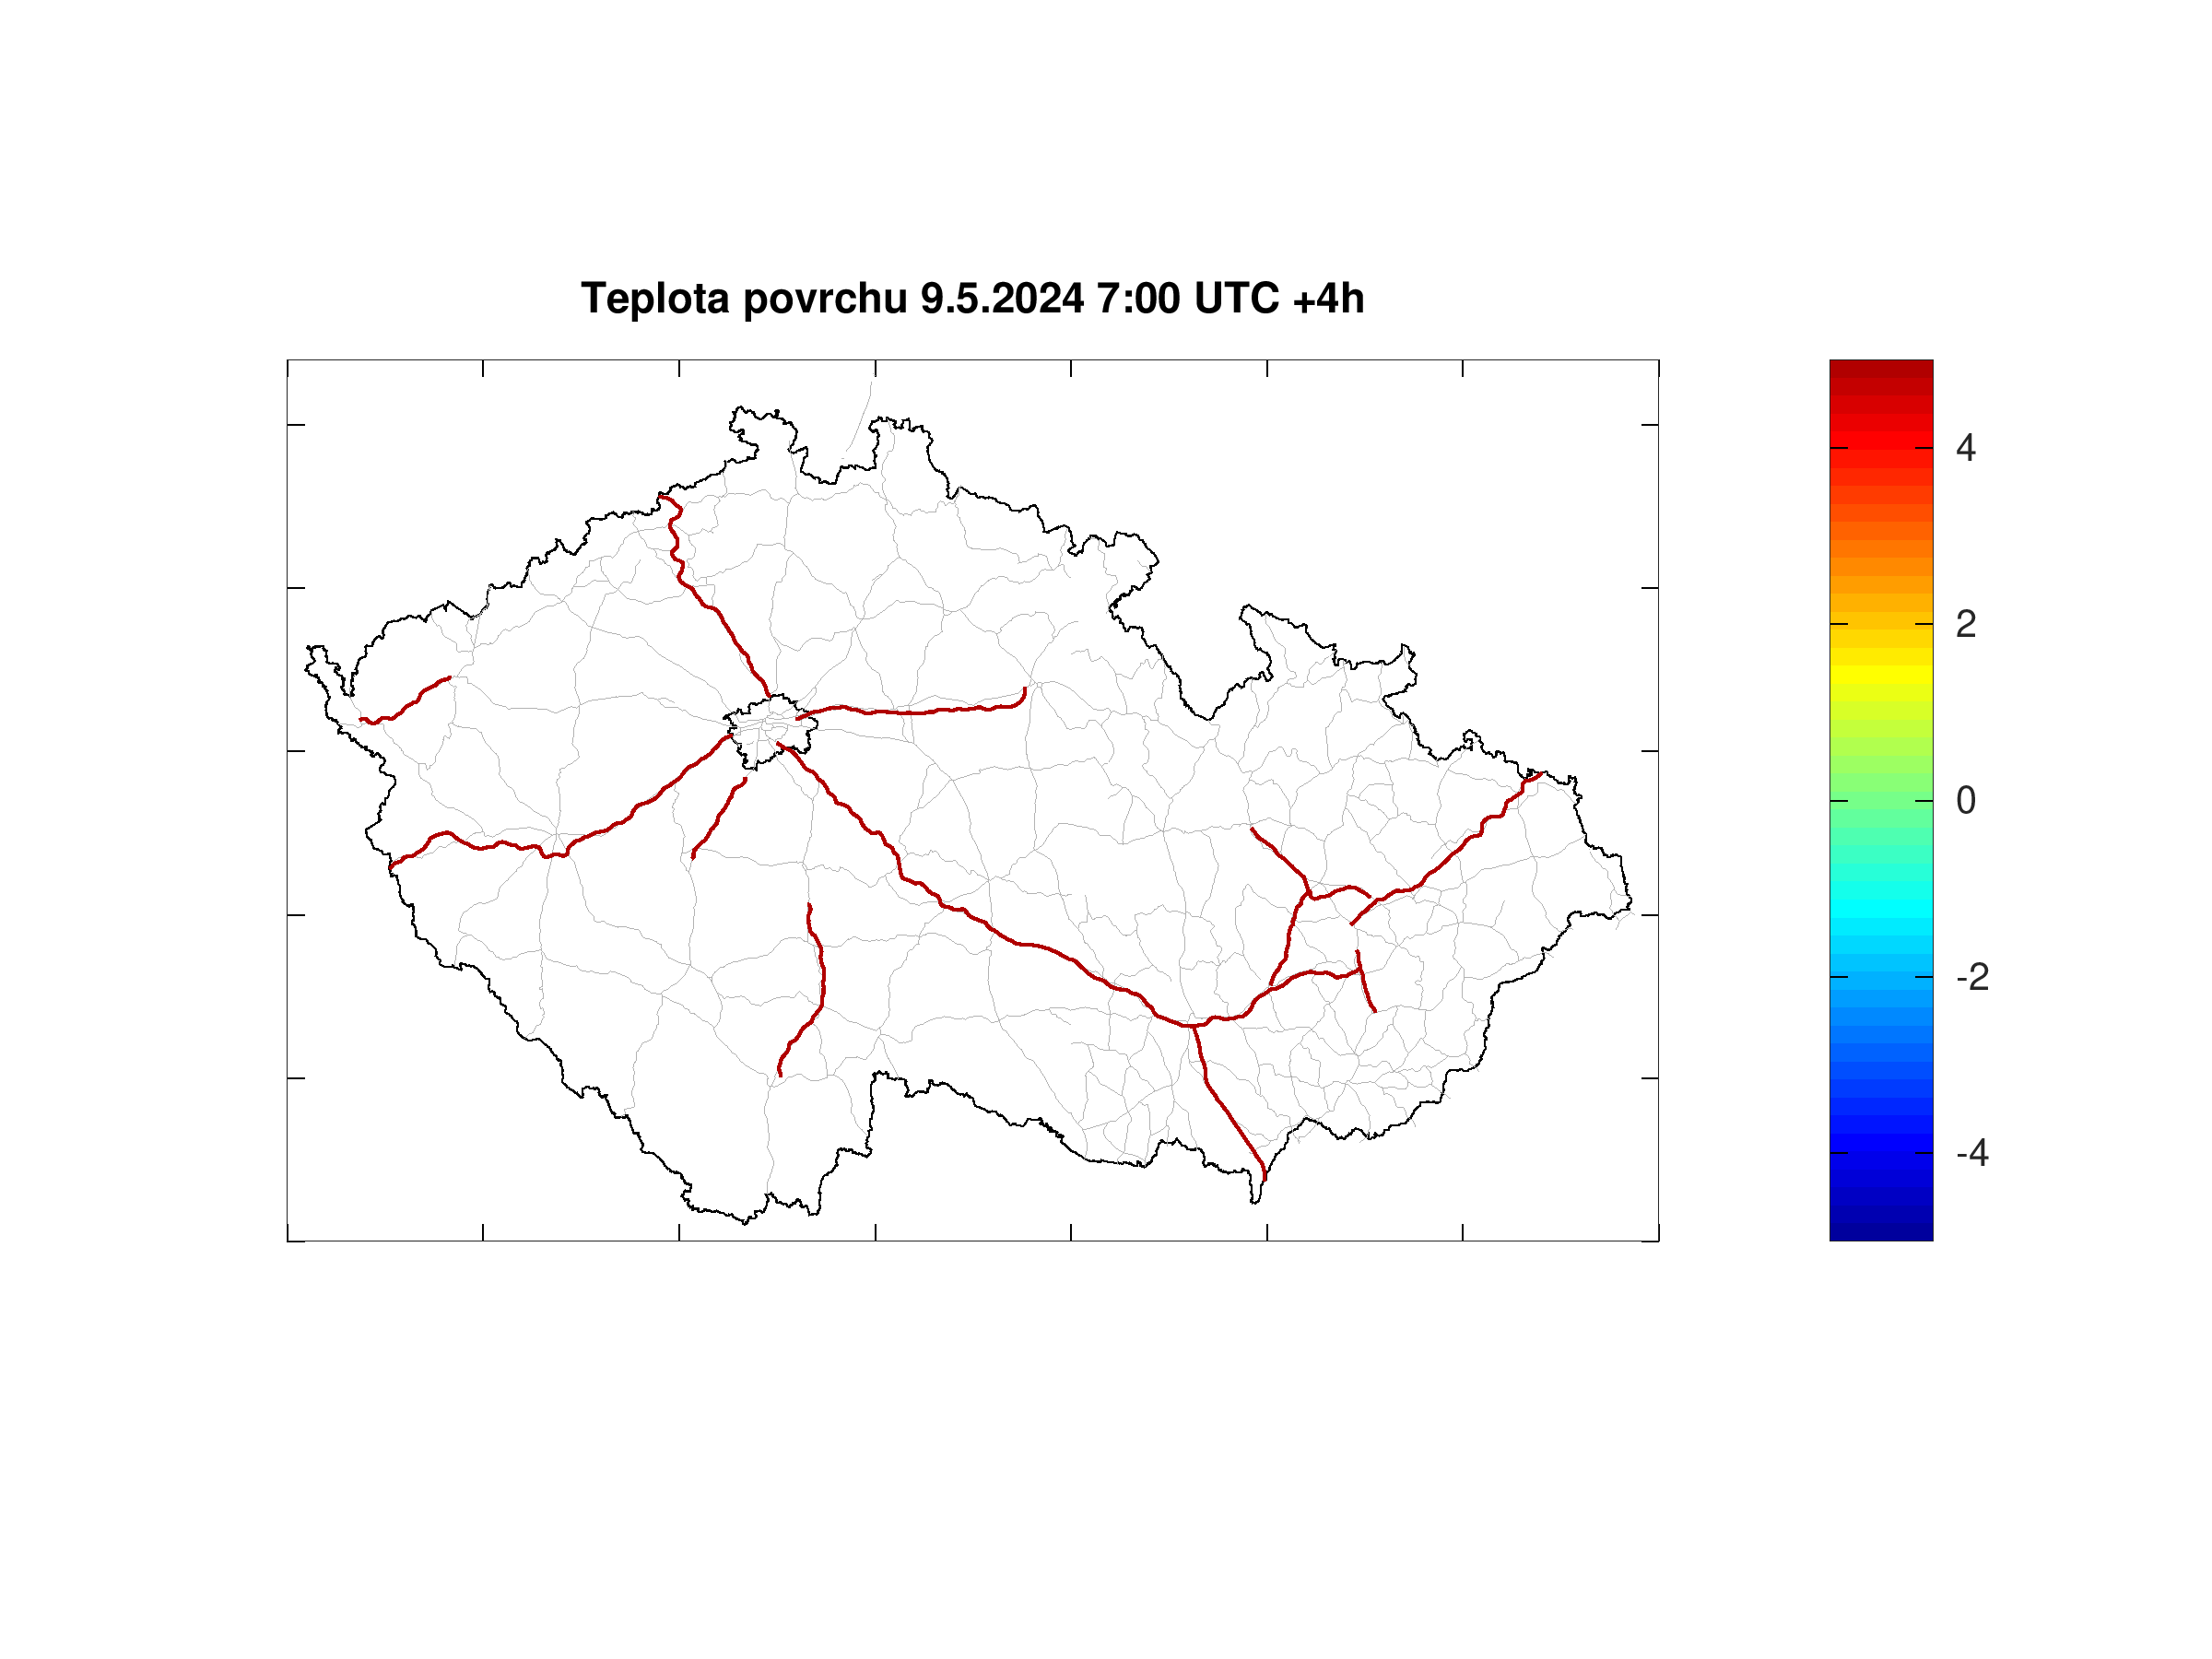 Road surface teperature forecast for Czech highways +4h